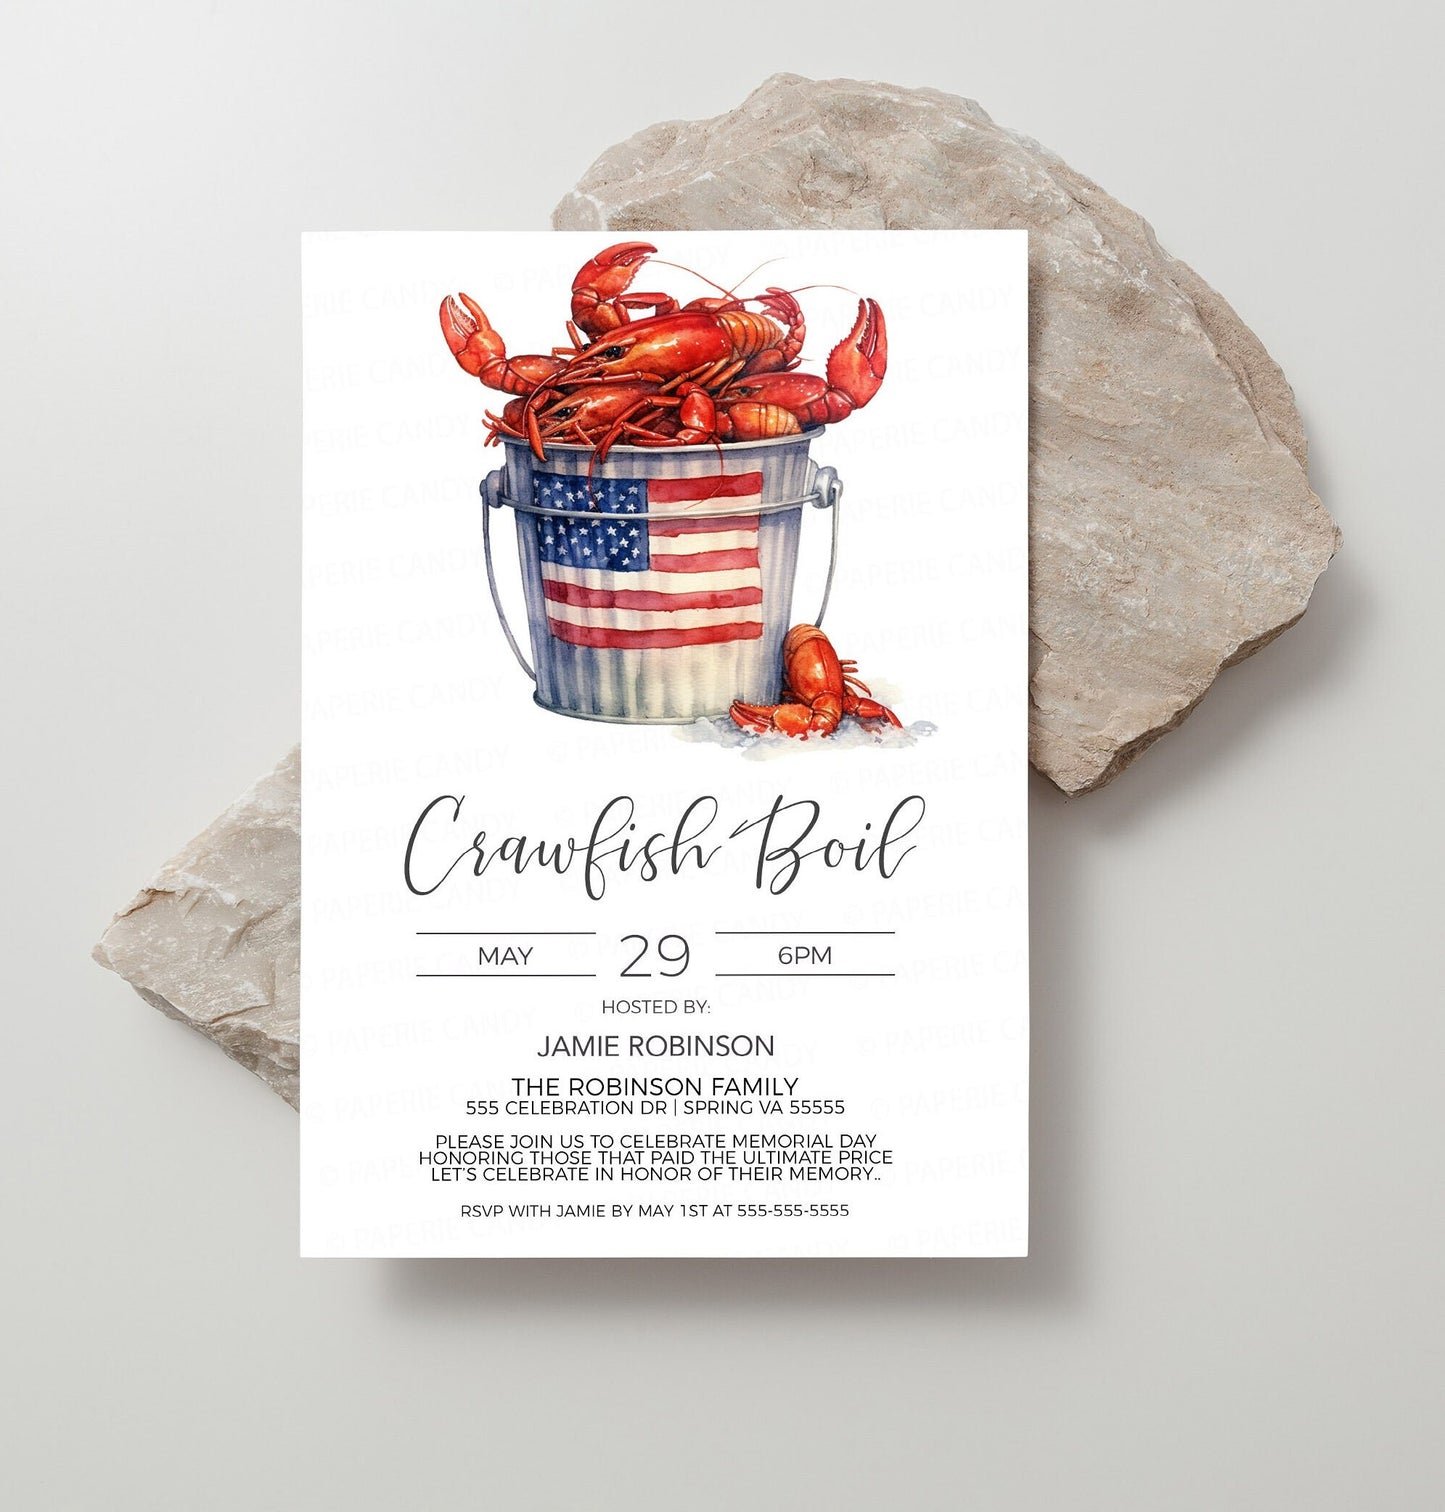 4th Of July Crawfish Boil Invitation, Independence Day Crawfish Boil Invite, Memorial Day Labor Day Beer Boil Party, Editable Printable